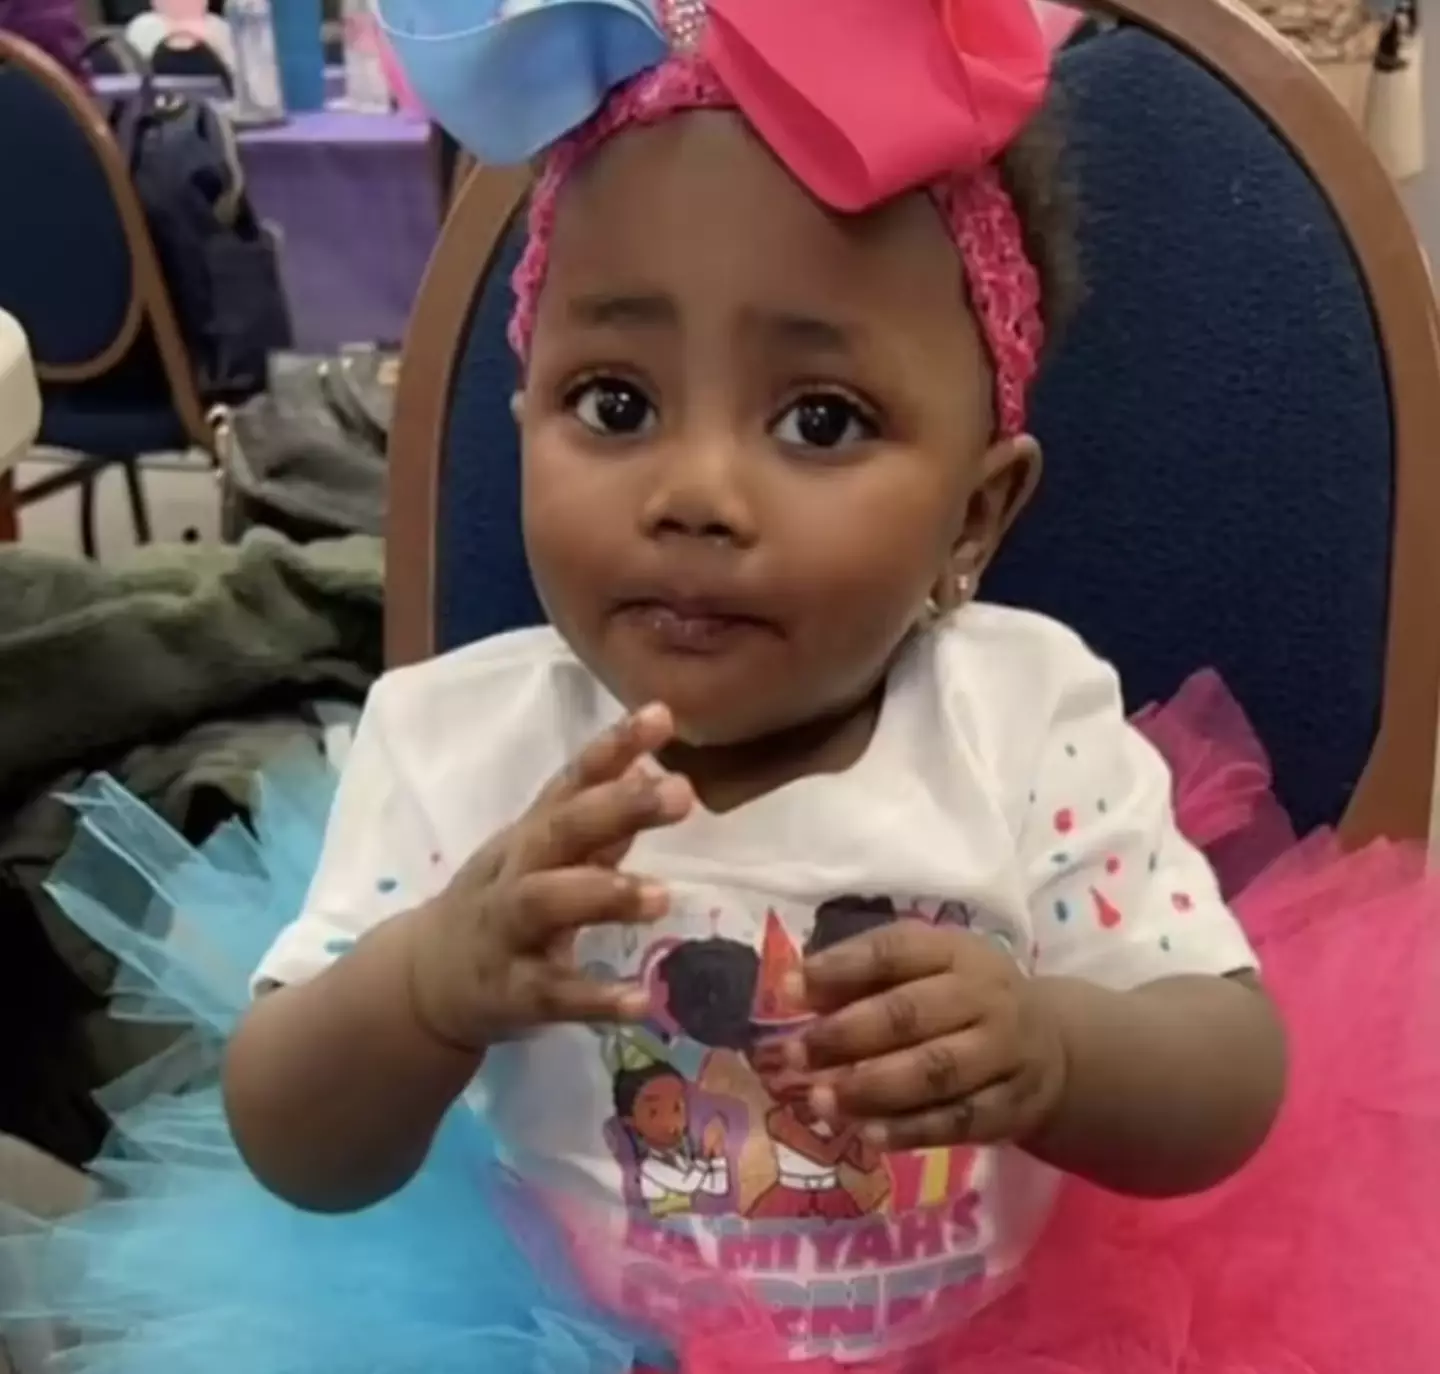 Ra’Miyah Worthington died after being left in a hot vehicle.